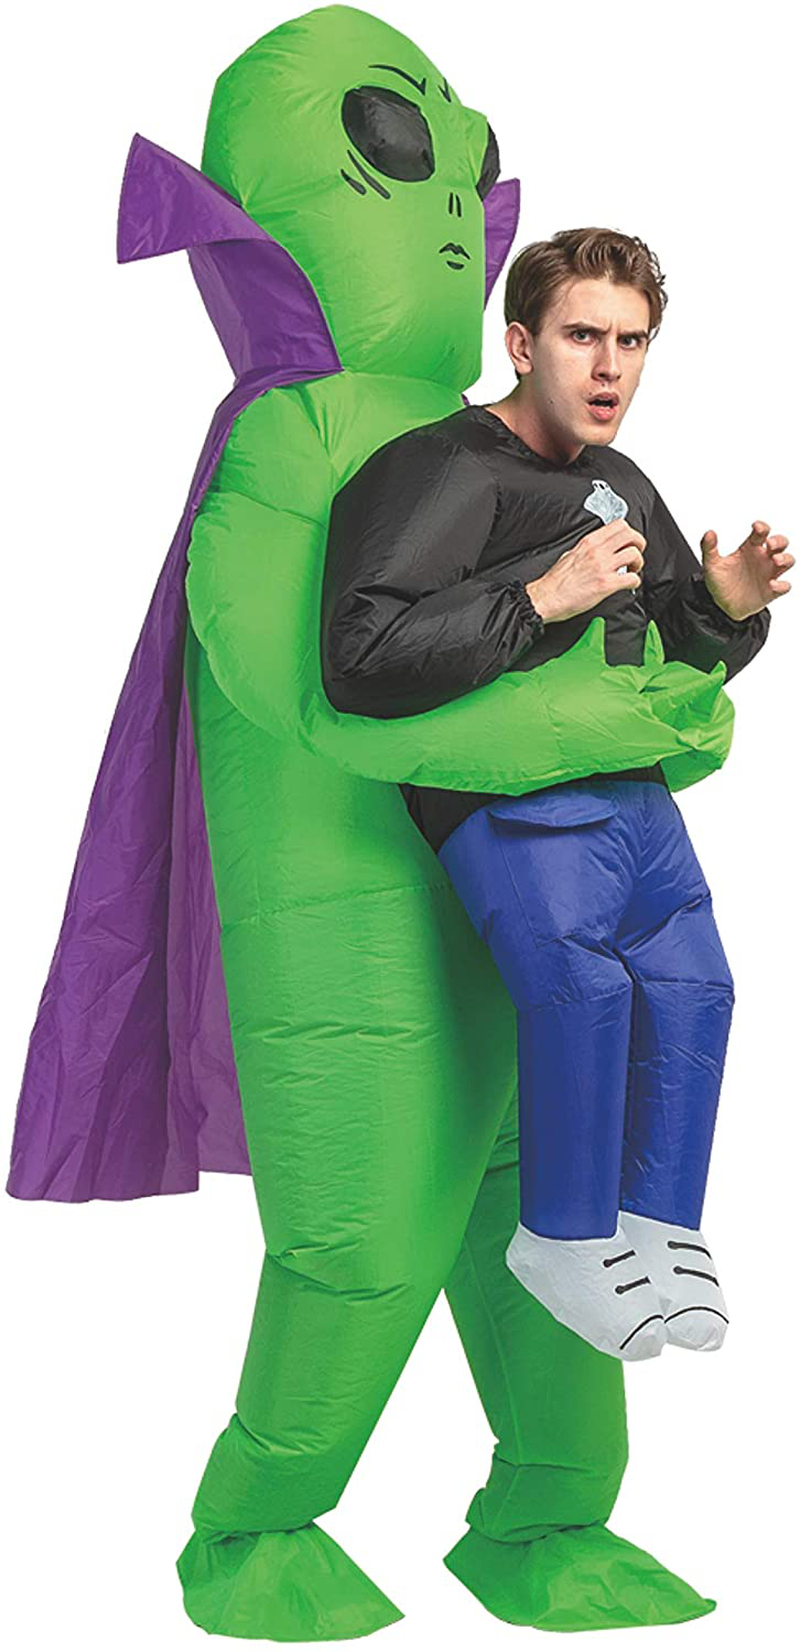 GOOSH Inflatable Costume for Adults, Halloween Costumes Men Women Alien Holding a Human, Blow Up Costume for Unisex Apparel & Accessories > Costumes & Accessories > Costumes GOOSH 63 INCH  